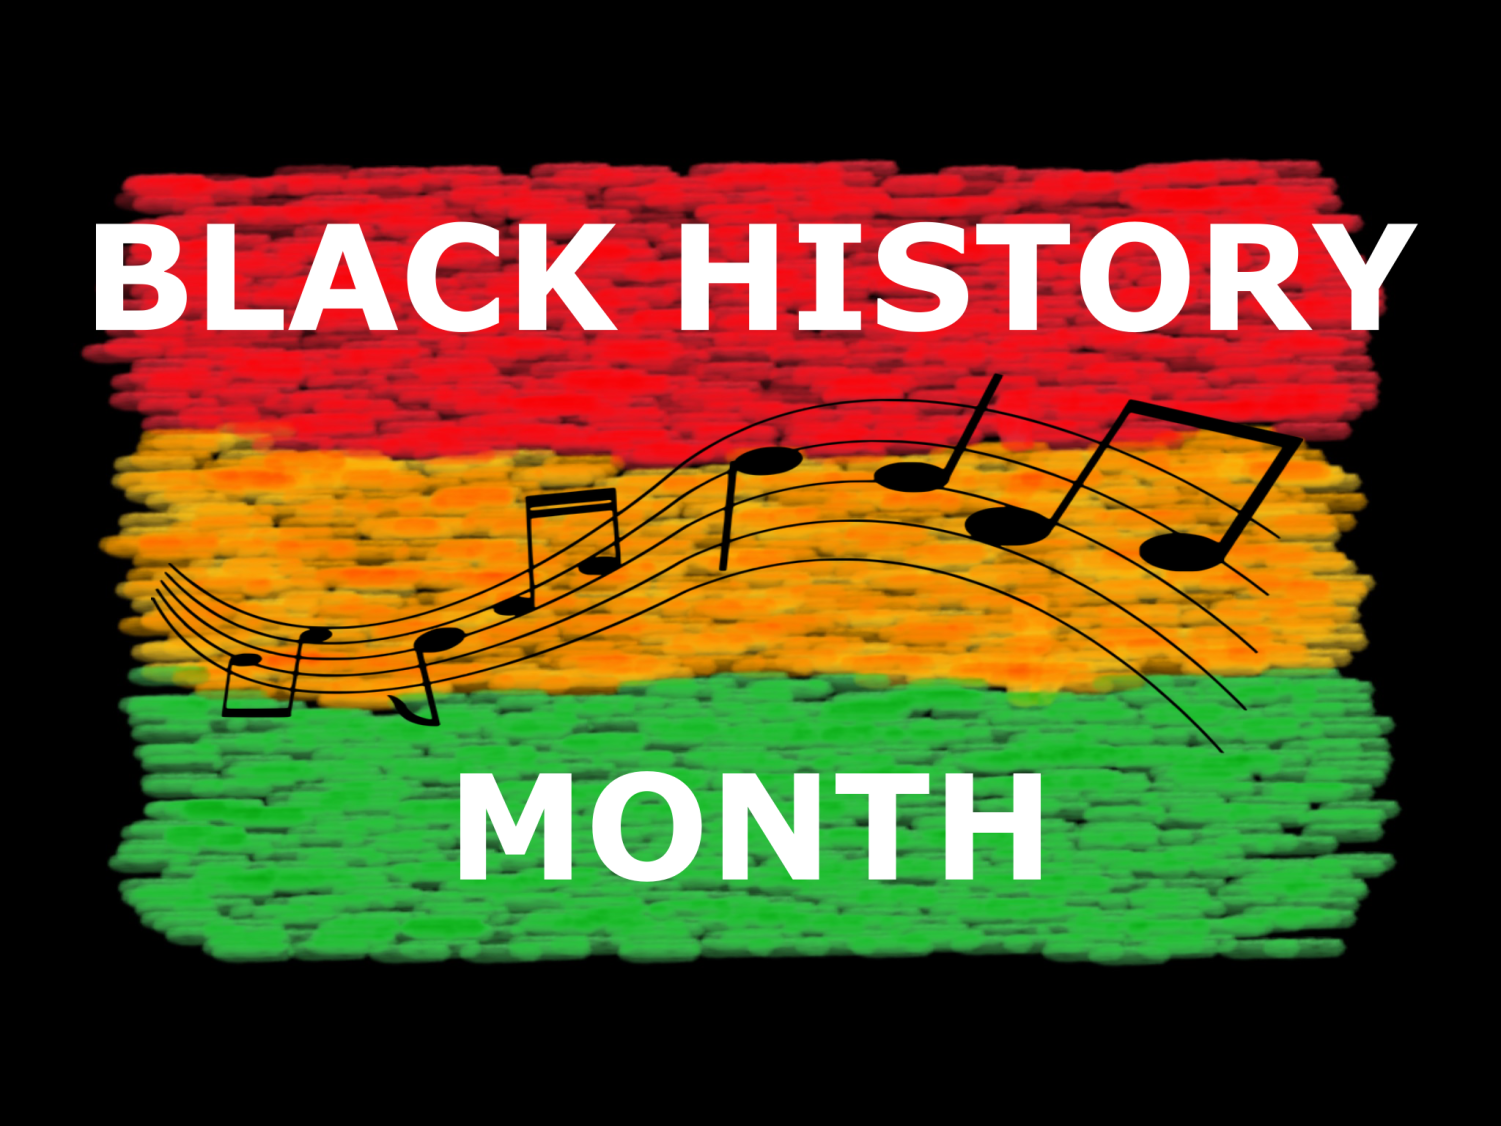 Music shines a light on Black History Month.